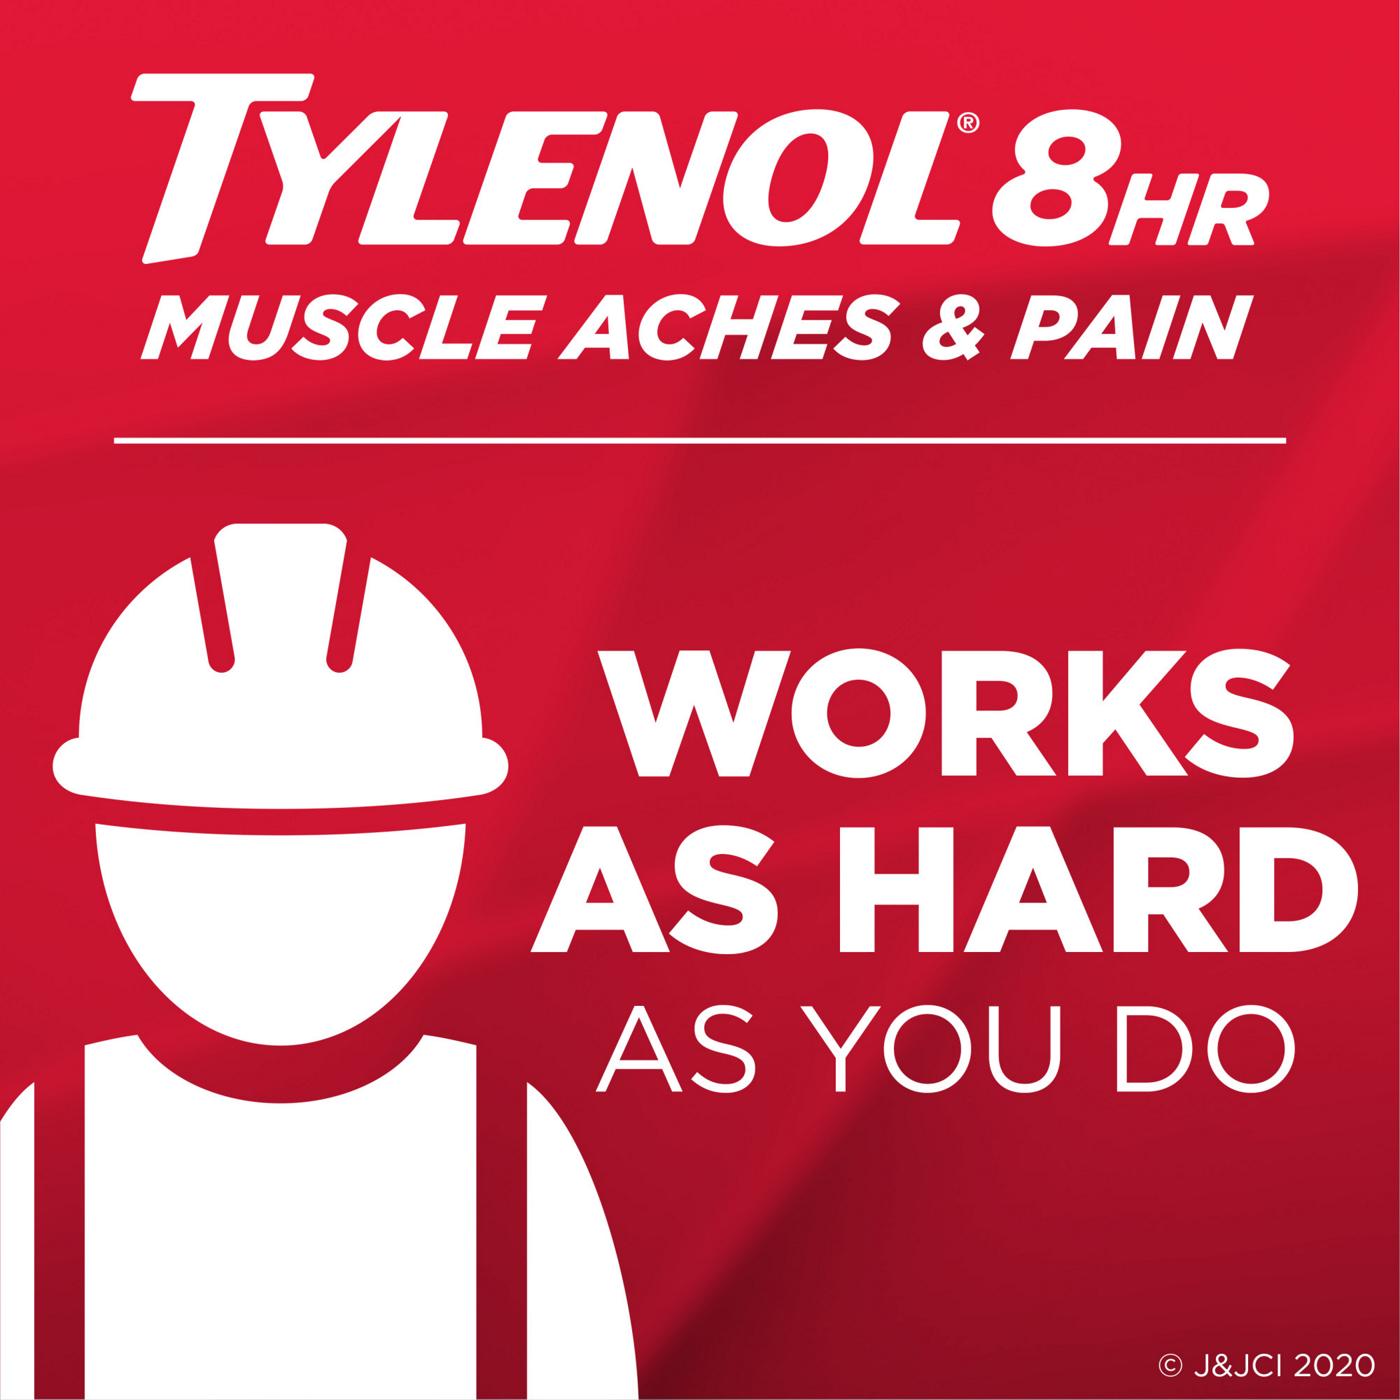 Tylenol 8 HR Muscle Aches & Pains; image 7 of 8